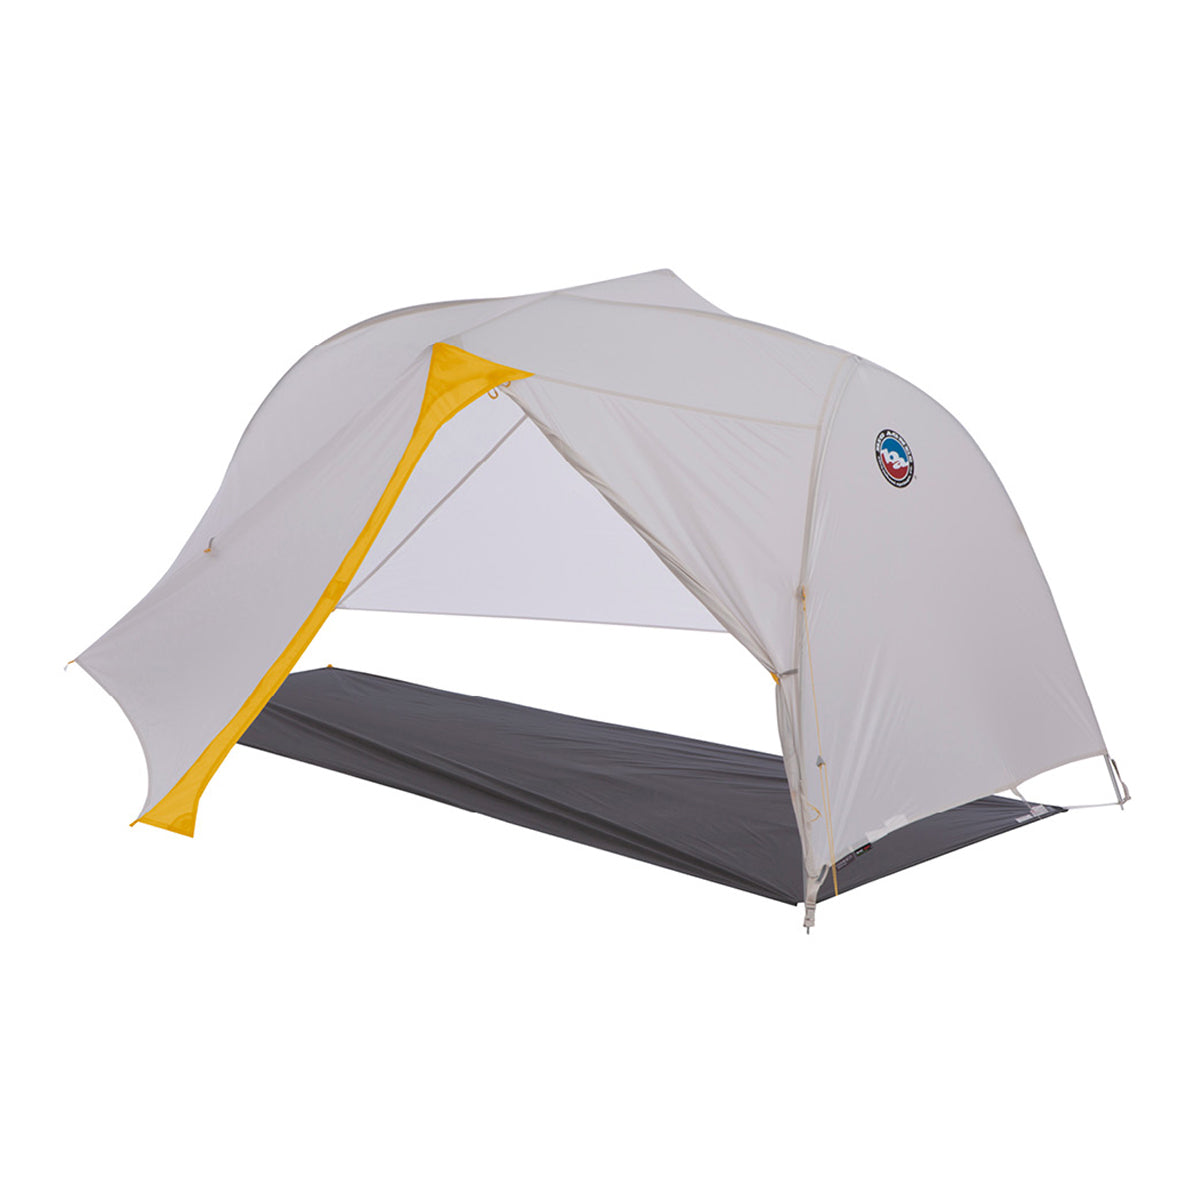 Big Agnes Tiger Wall UL 1 Person Solution Dye Tent in  by GOHUNT | Big Agnes - GOHUNT Shop